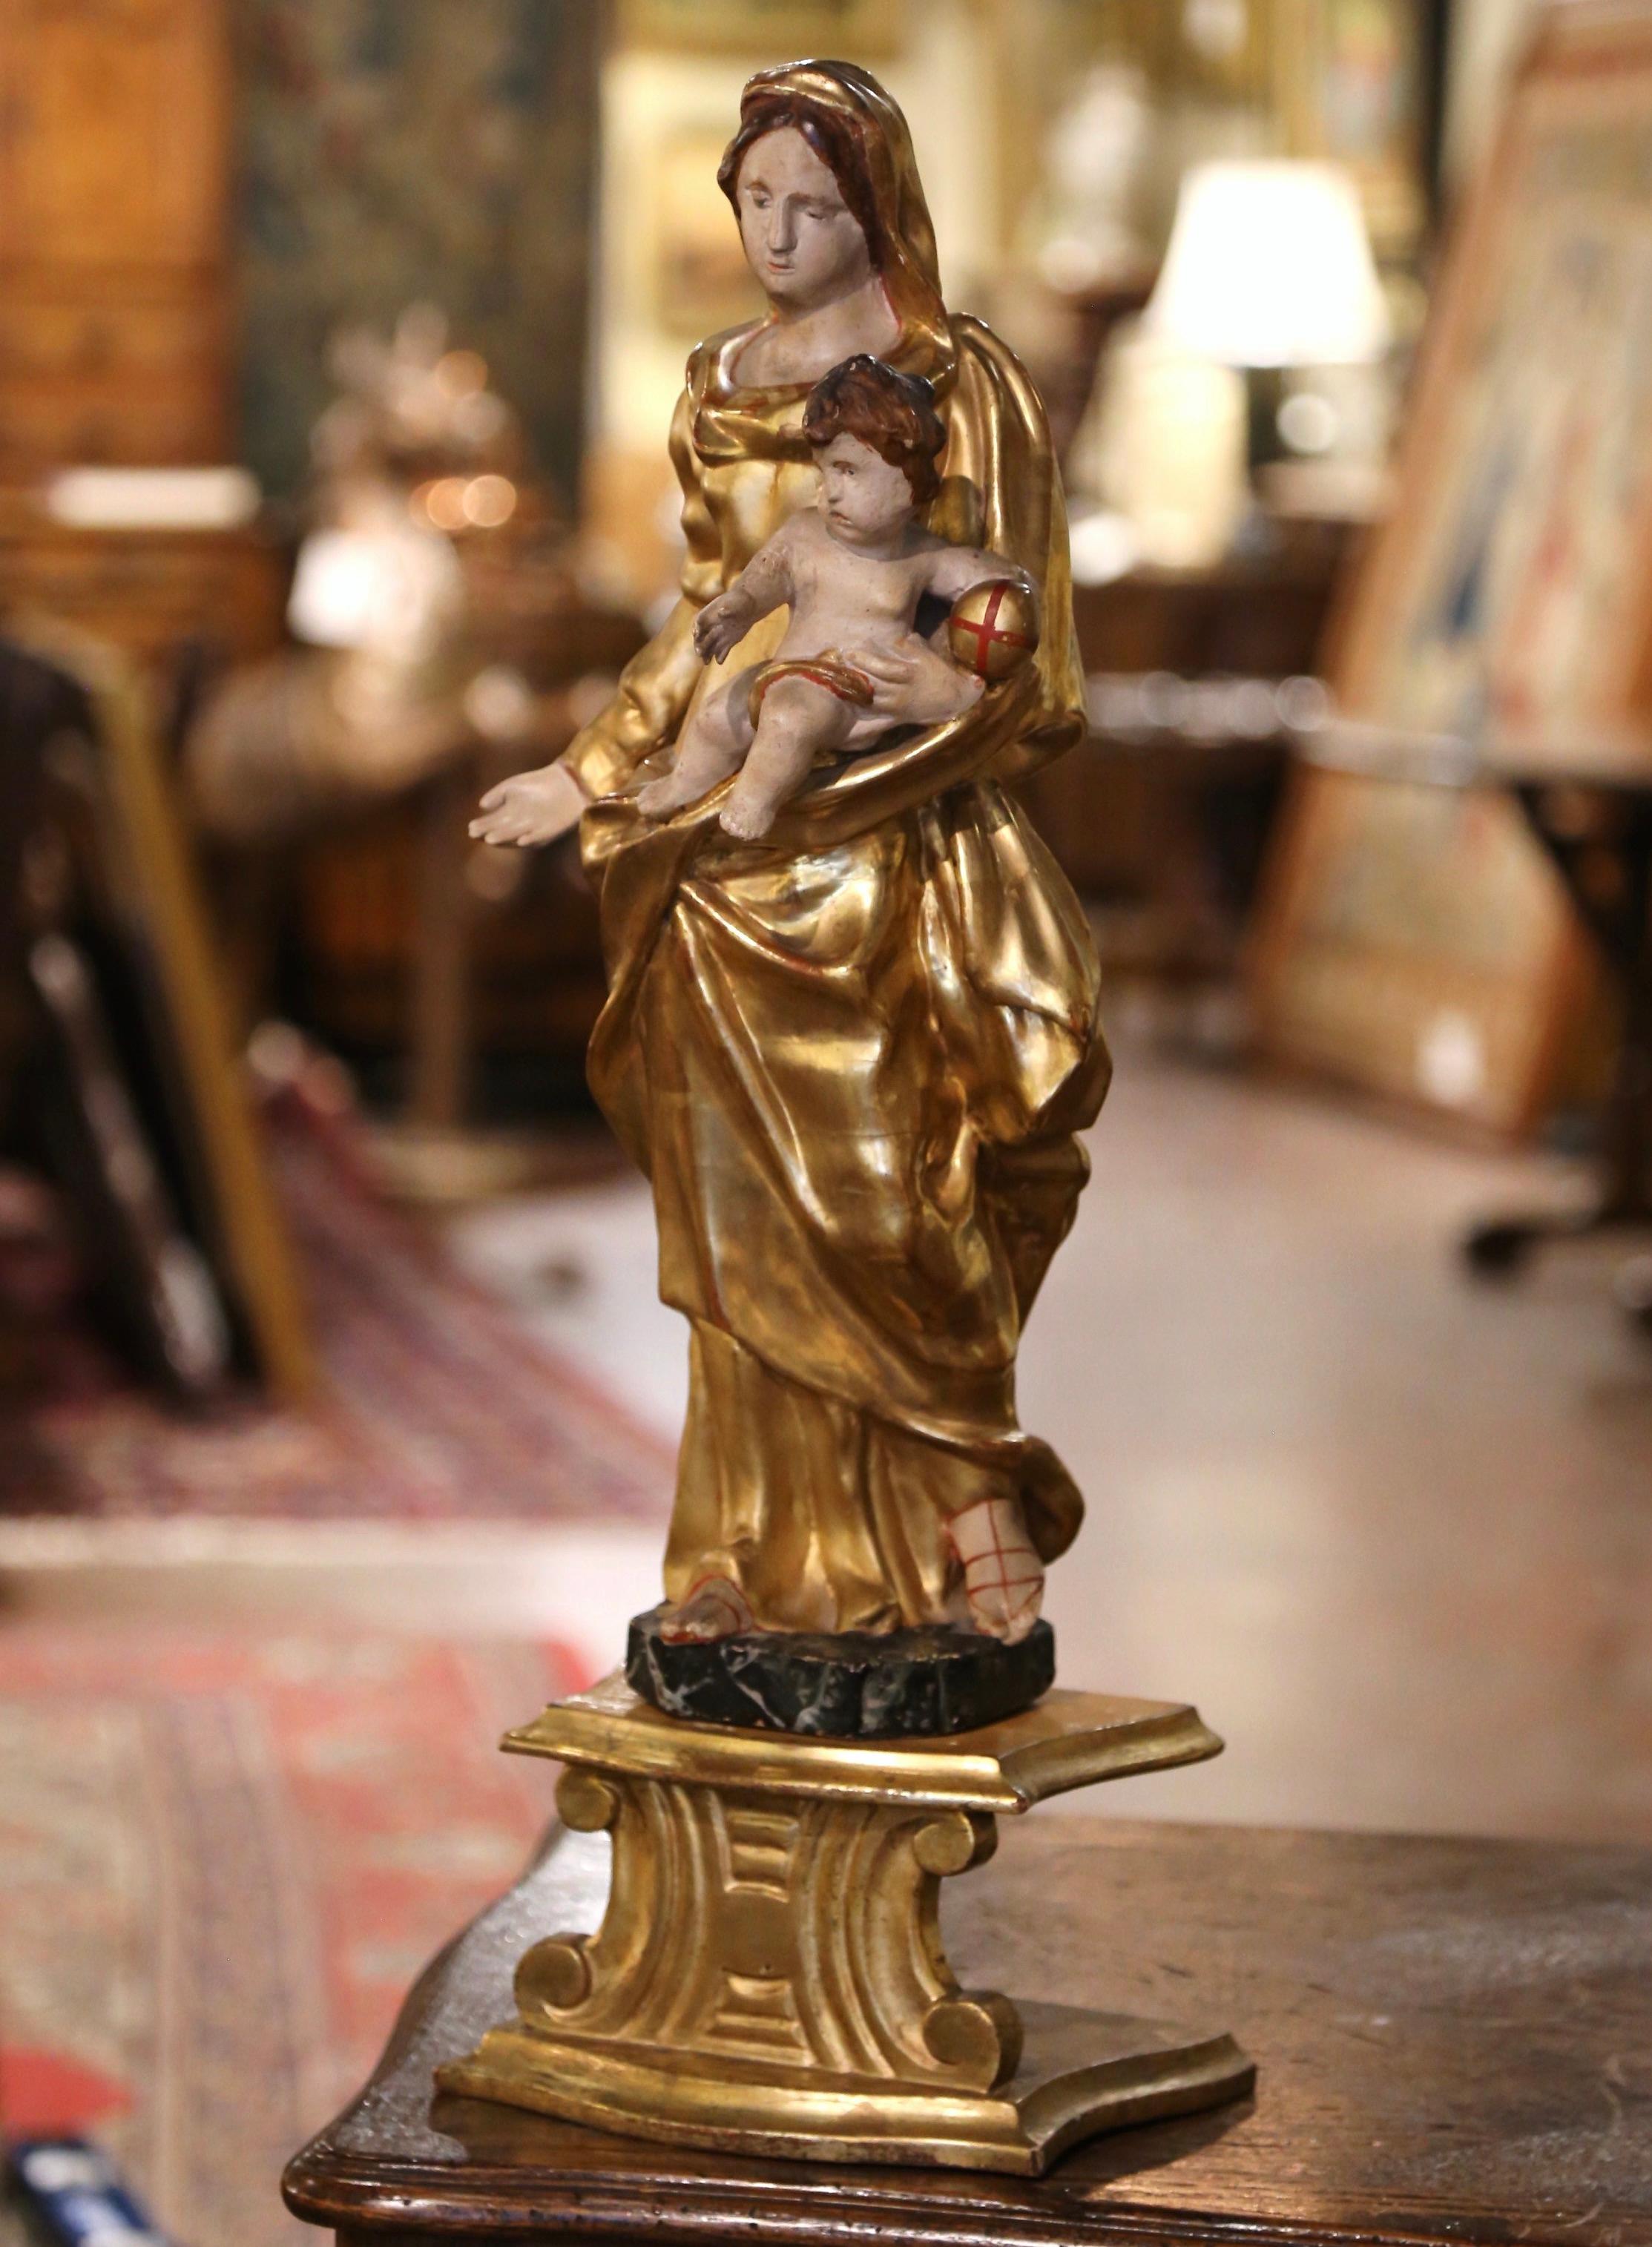 Place this beautiful gilt statue with base in a living room or bedroom. Hand carved circa 1780, this elegant two-piece antique sculpture was found in a chapel in Southern France and depicts the Virgin Mary and her Son. The alluring polychrome and